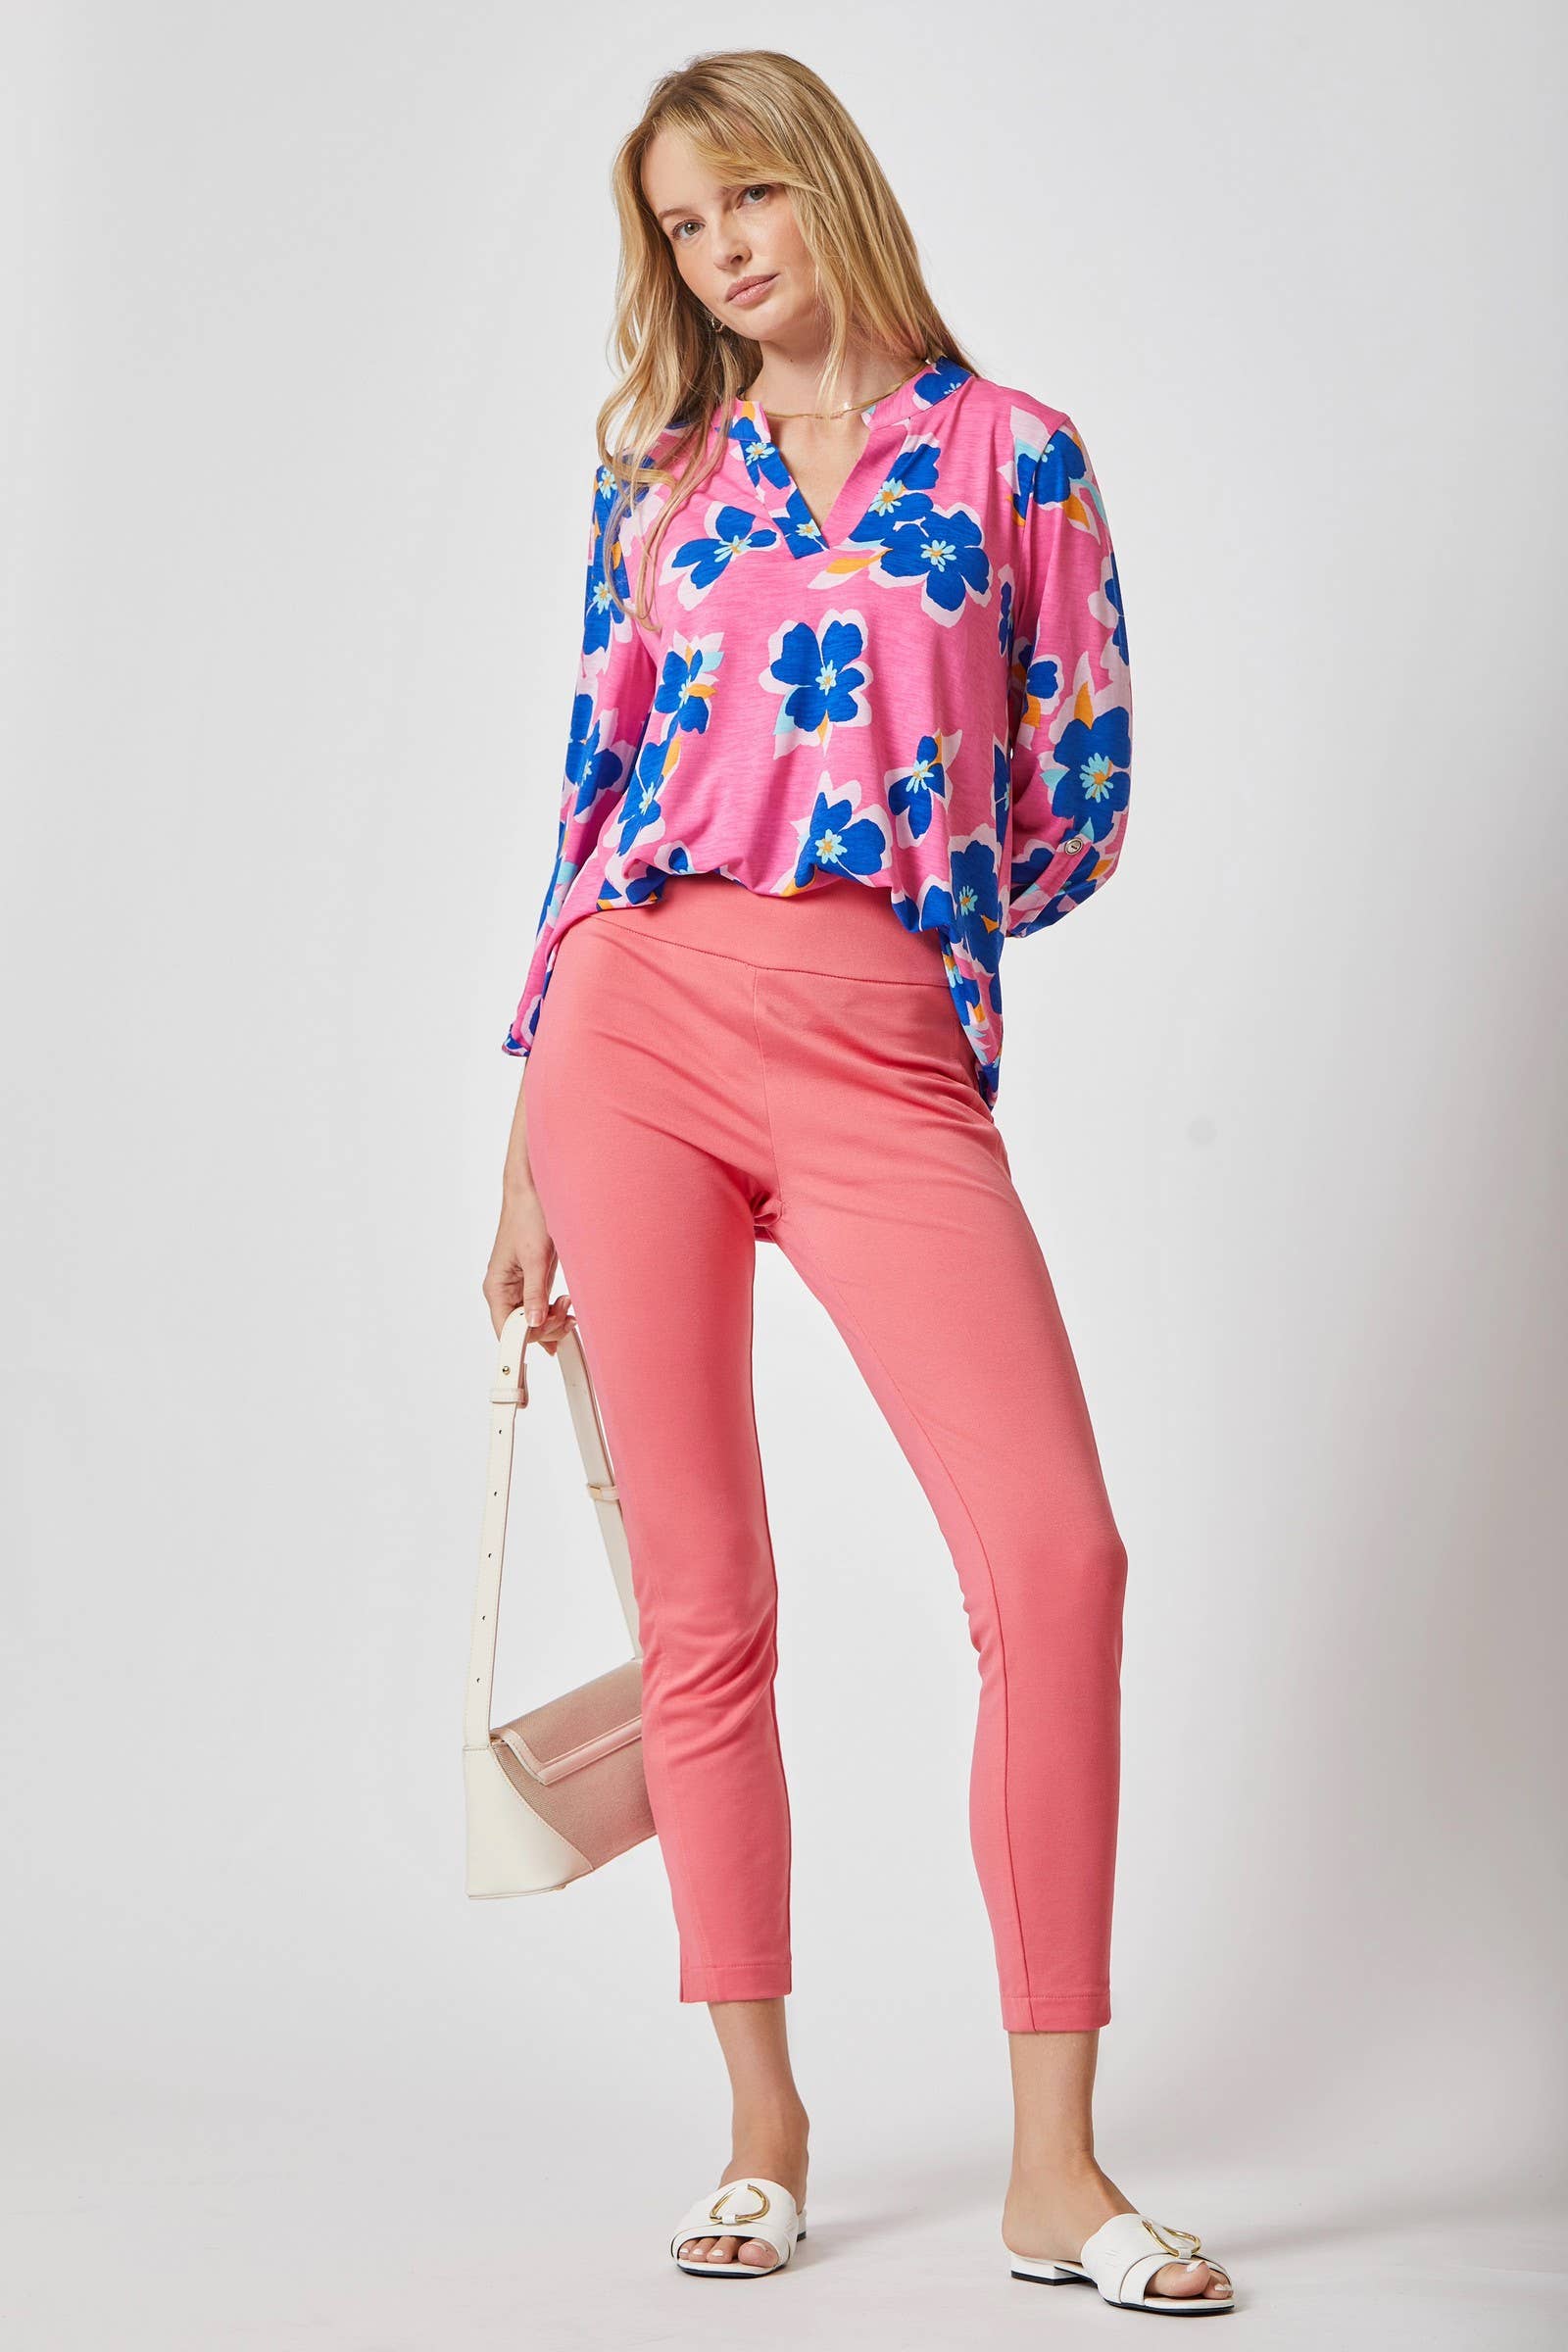 Hot Pink Floral Lizzy Blouse